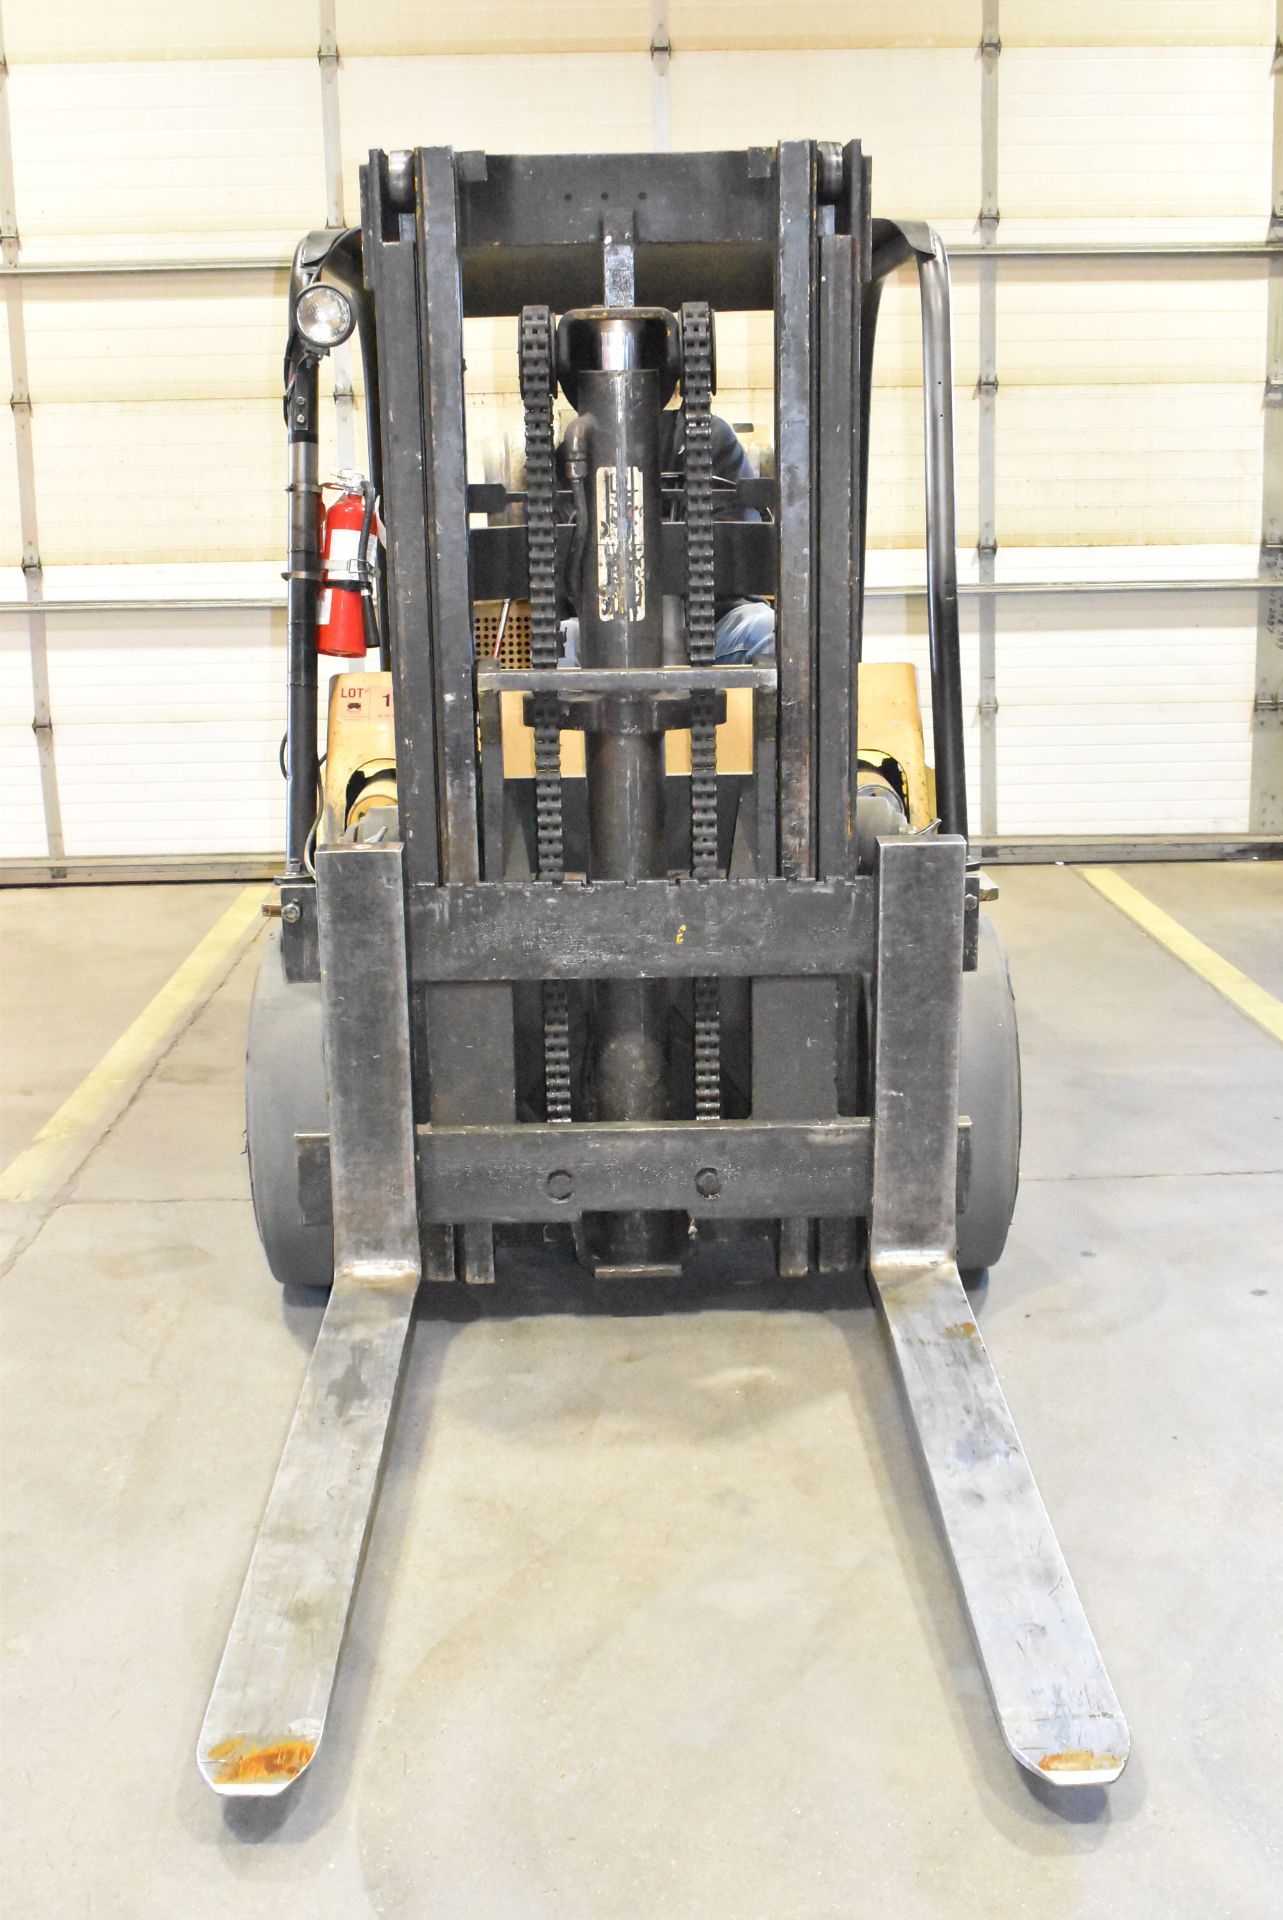 HYSTER S150A 15,000 LB. CAPACITY LPG FORKLIFT WITH 129" MAX. LIFT HEIGHT, 2-STAGE MAST, SOLID TIRES, - Image 4 of 18